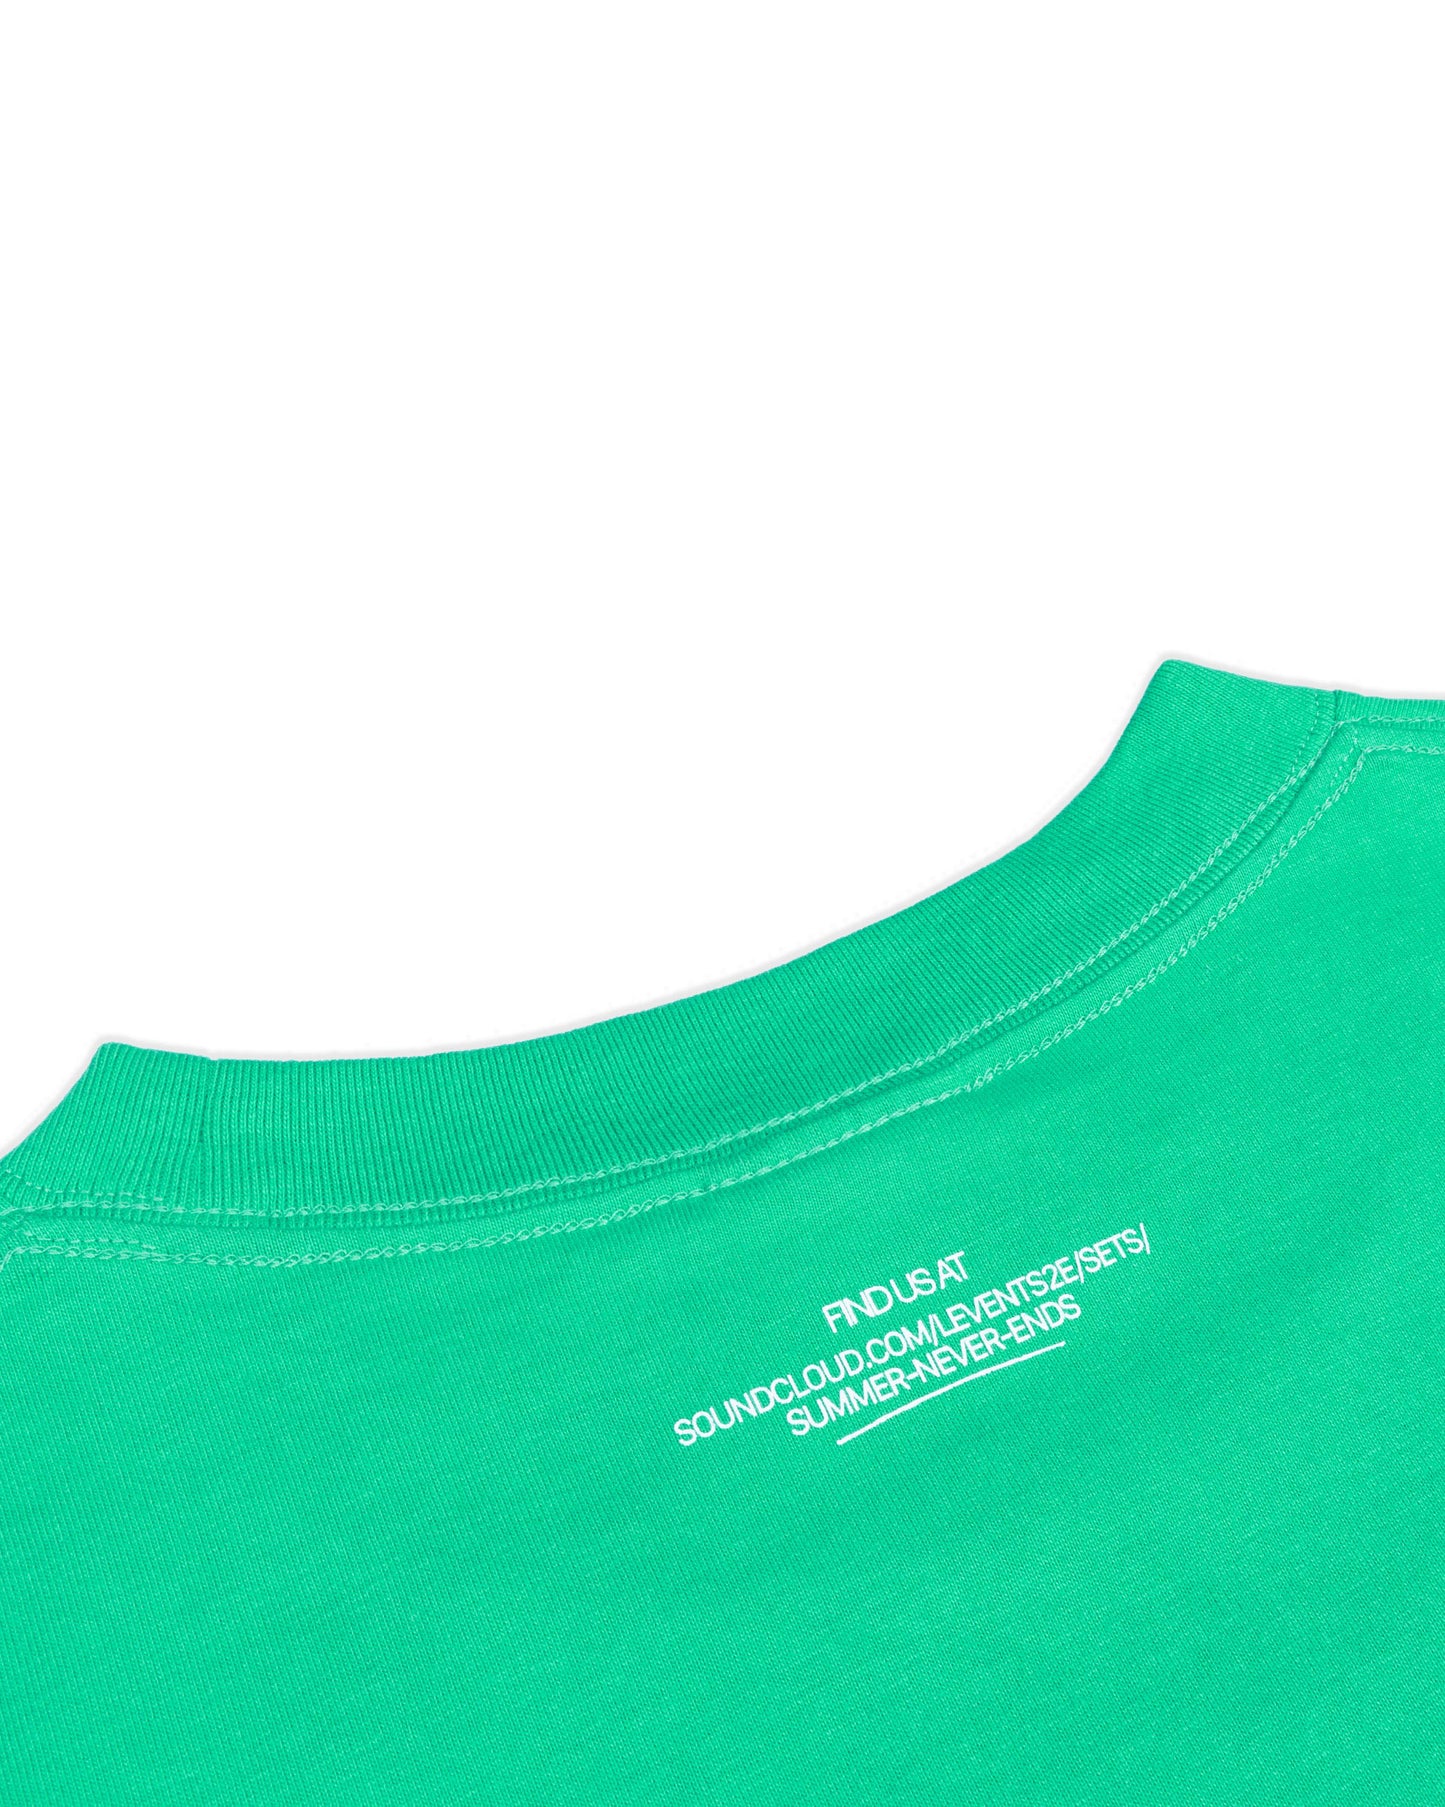 Levents® Summer Vibe Tee/ Green